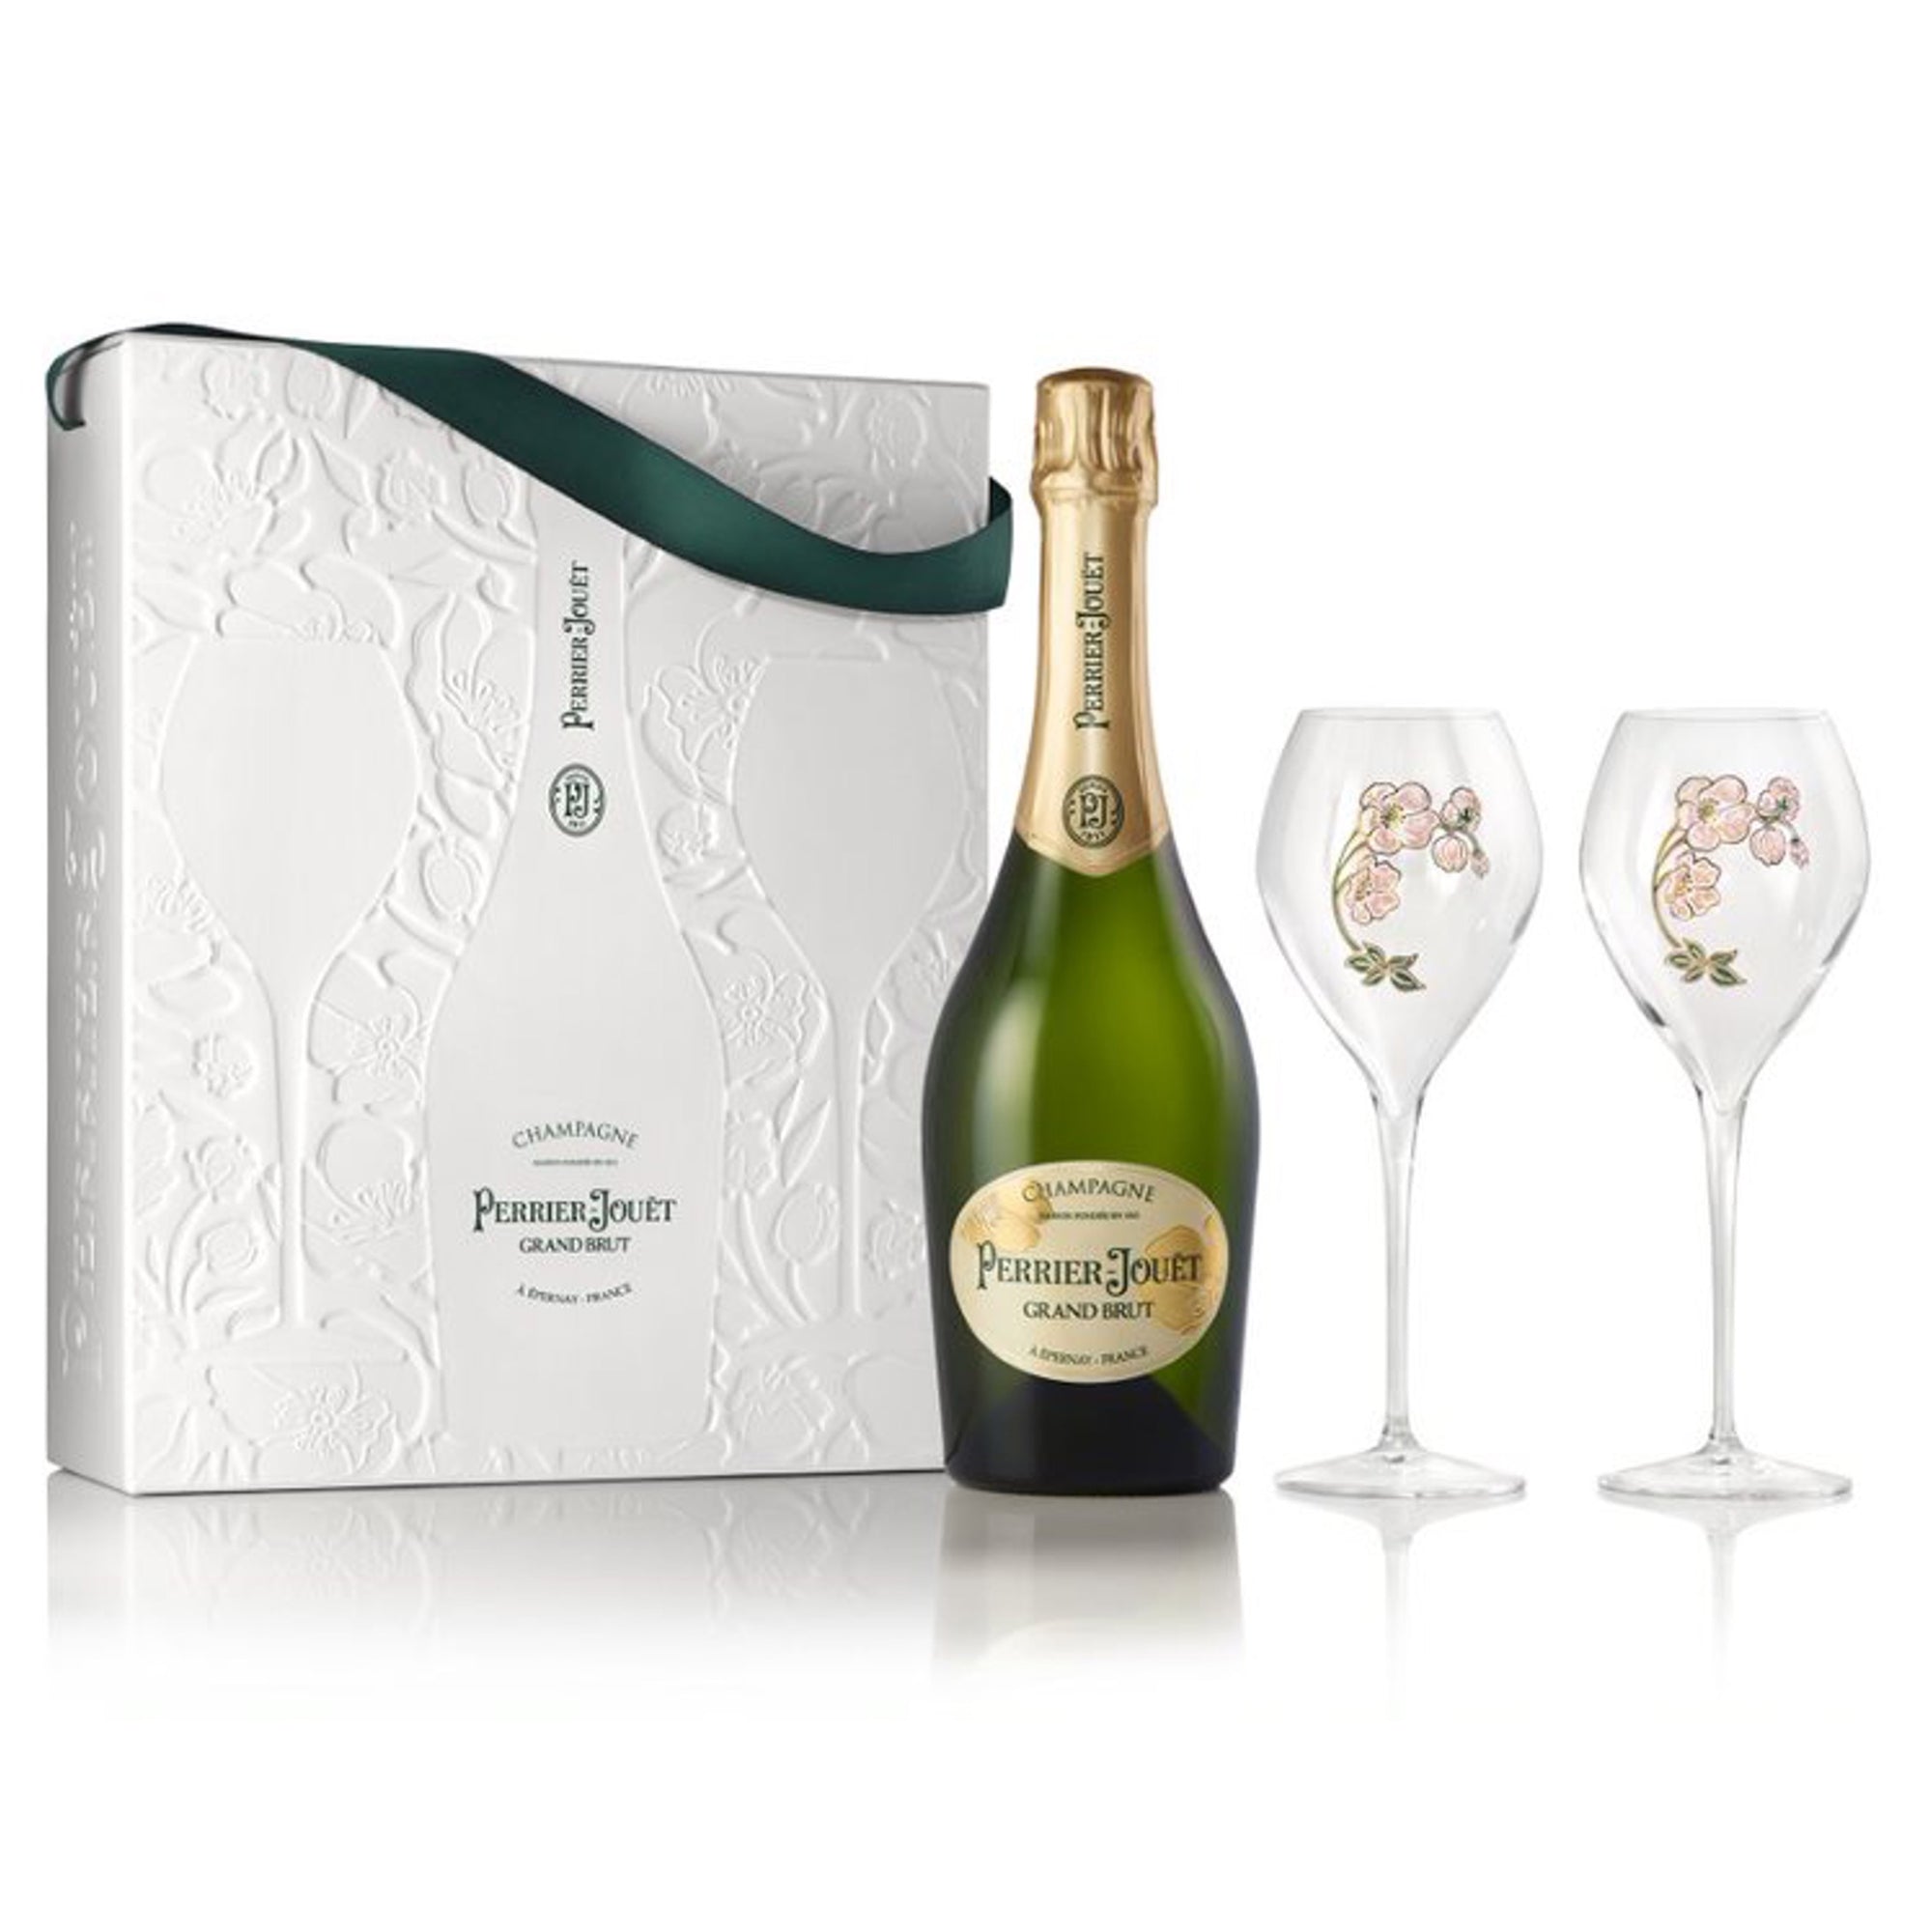 PERRIER JOUET Champagne Grand Brut NV with 2 glasses in Ecobox 